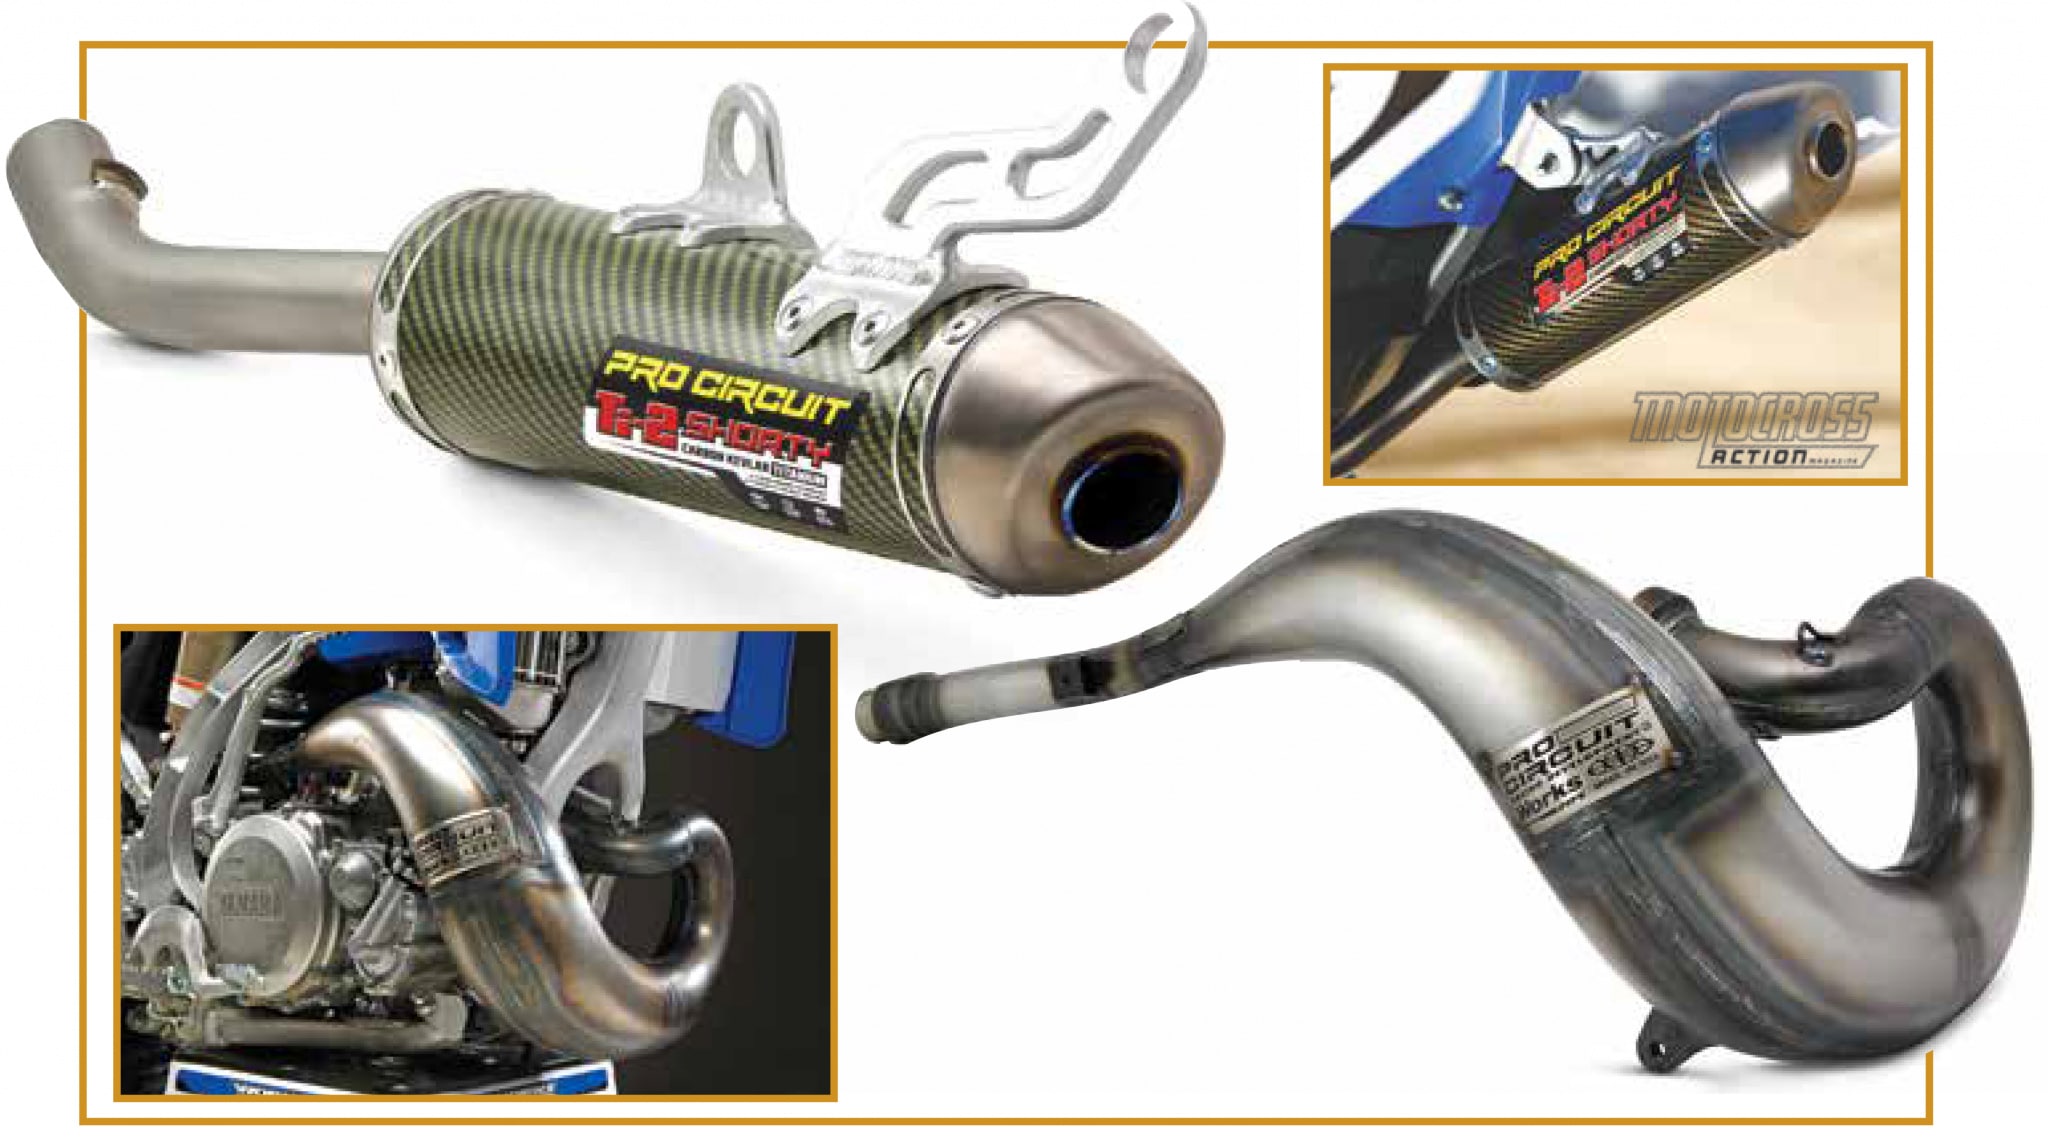 Platinum Pipe & 304 Silencer Pro Circuit Exhaust System compatible with Yamaha YZ250 YZ250X 2003-on_PY05250P|SY03250-SE